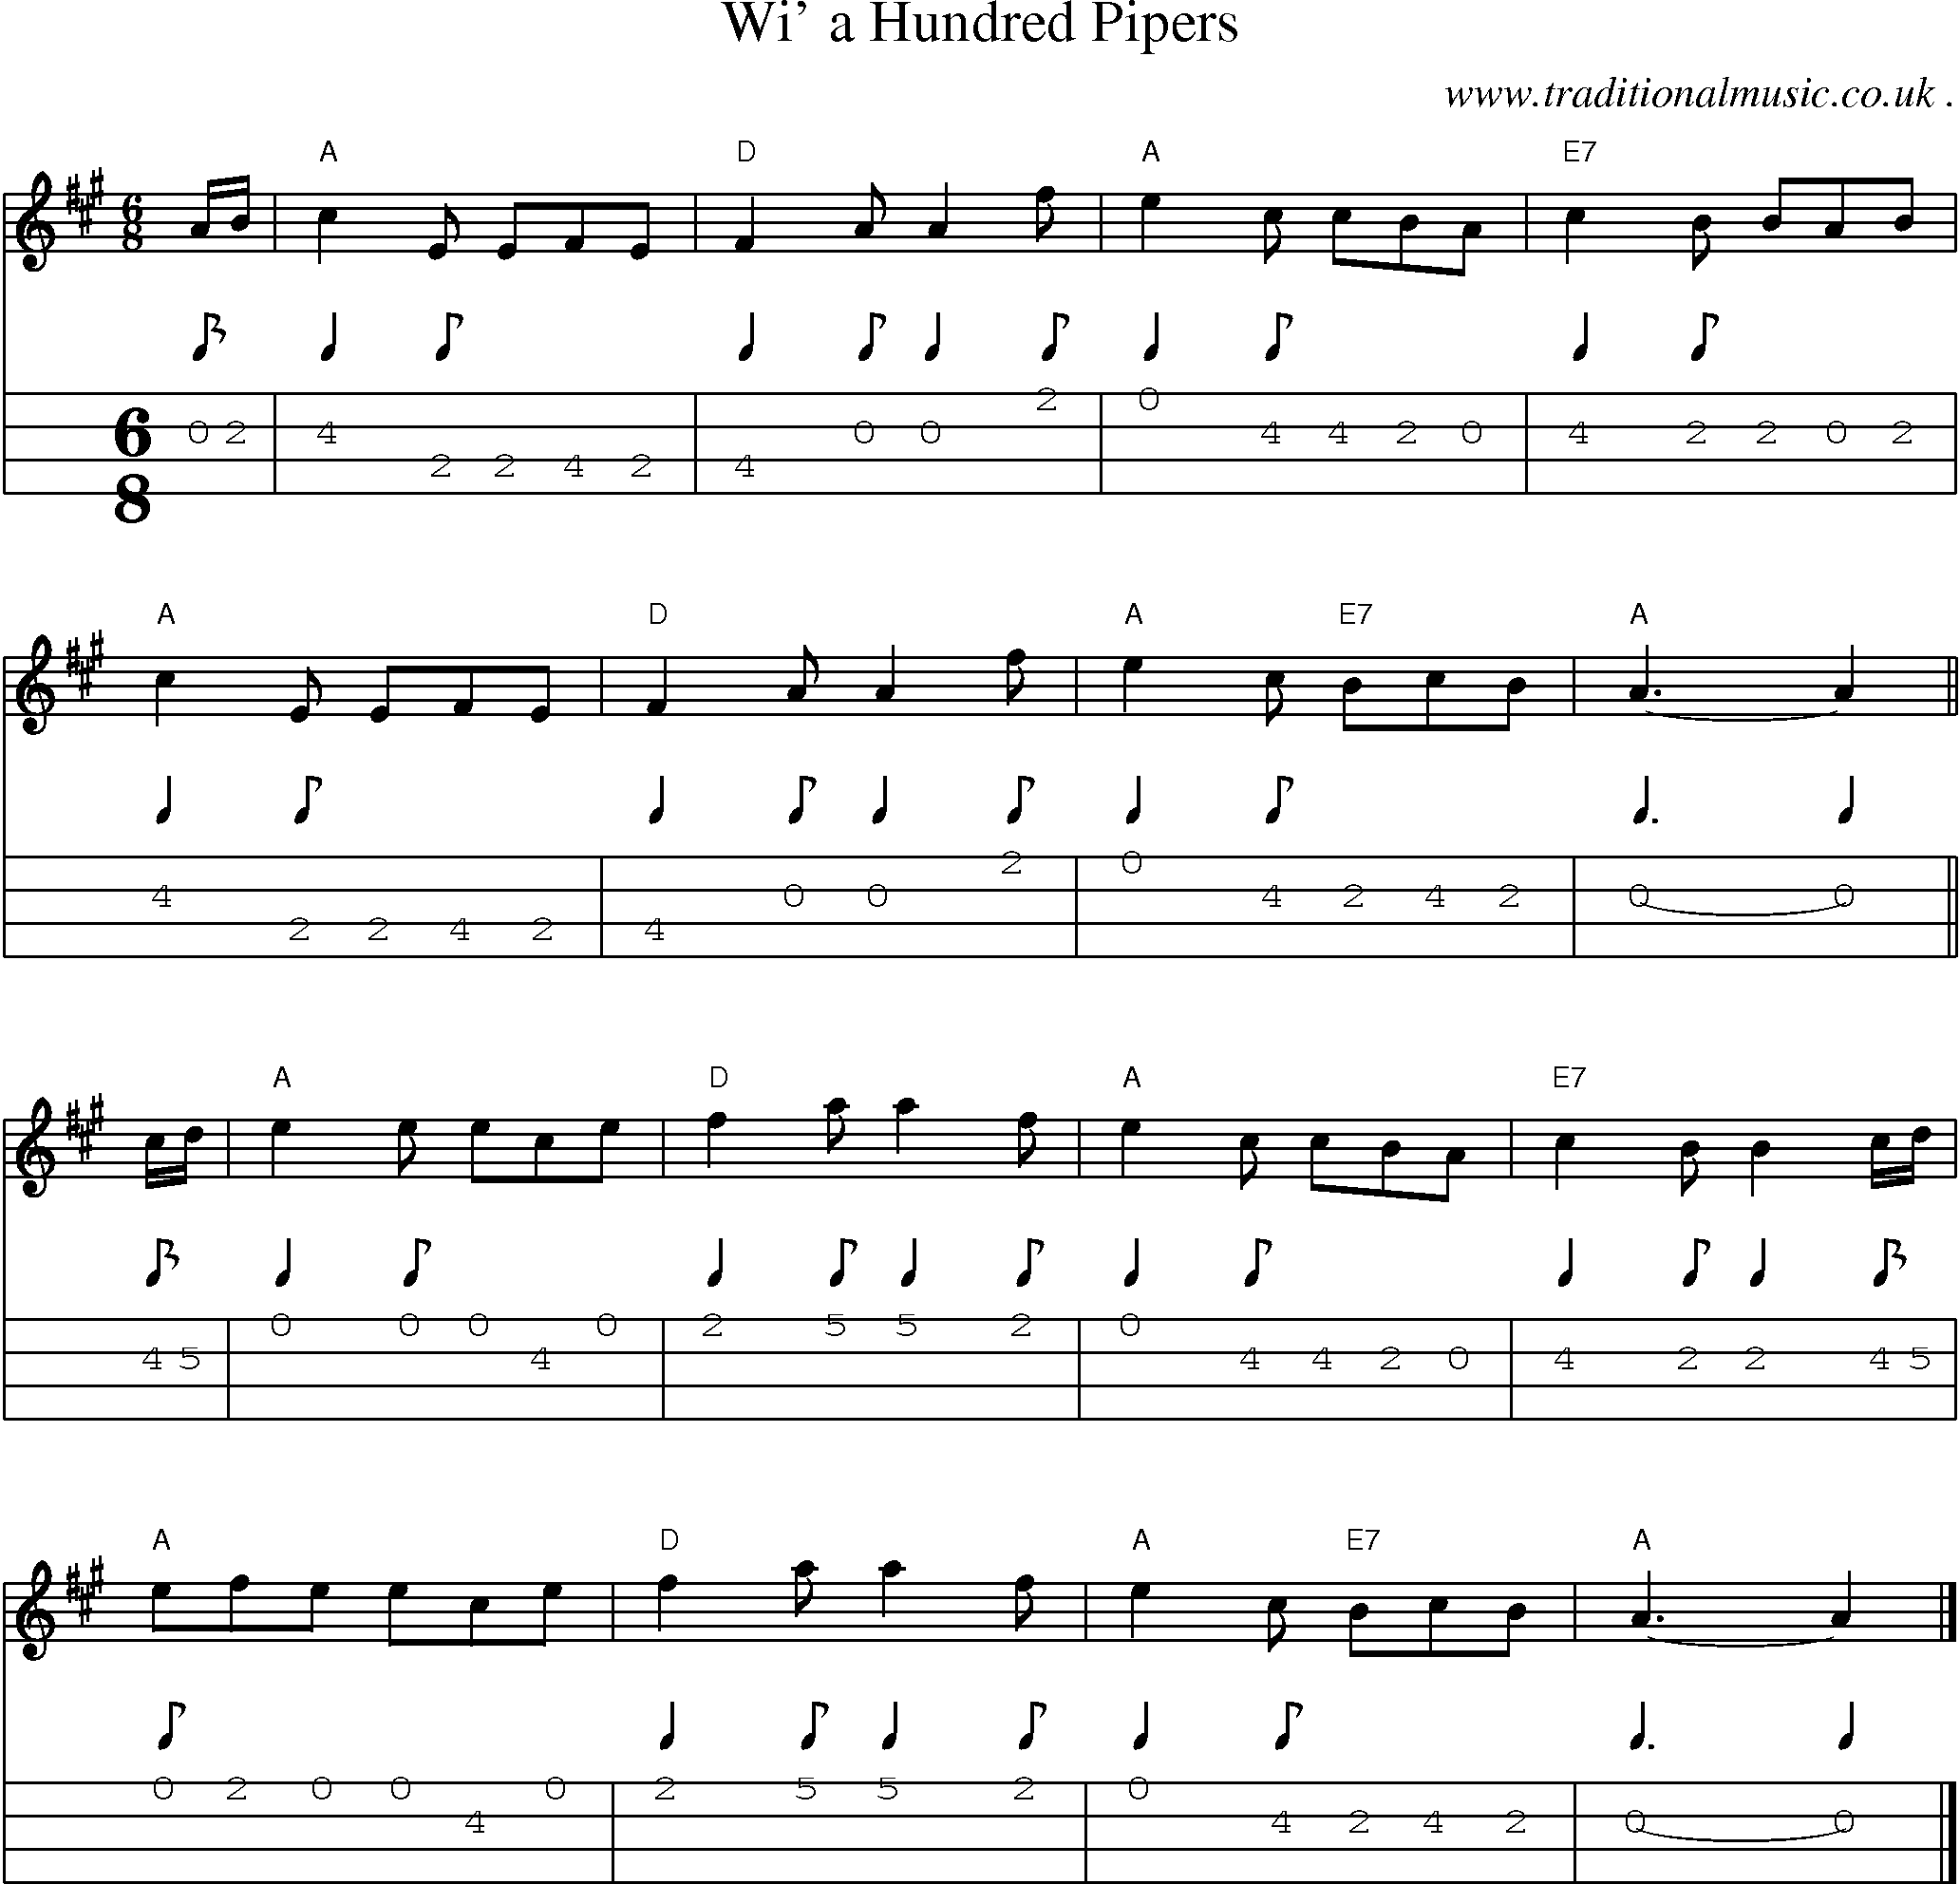 Music Score and Guitar Tabs for Wi a Hundred Pipers